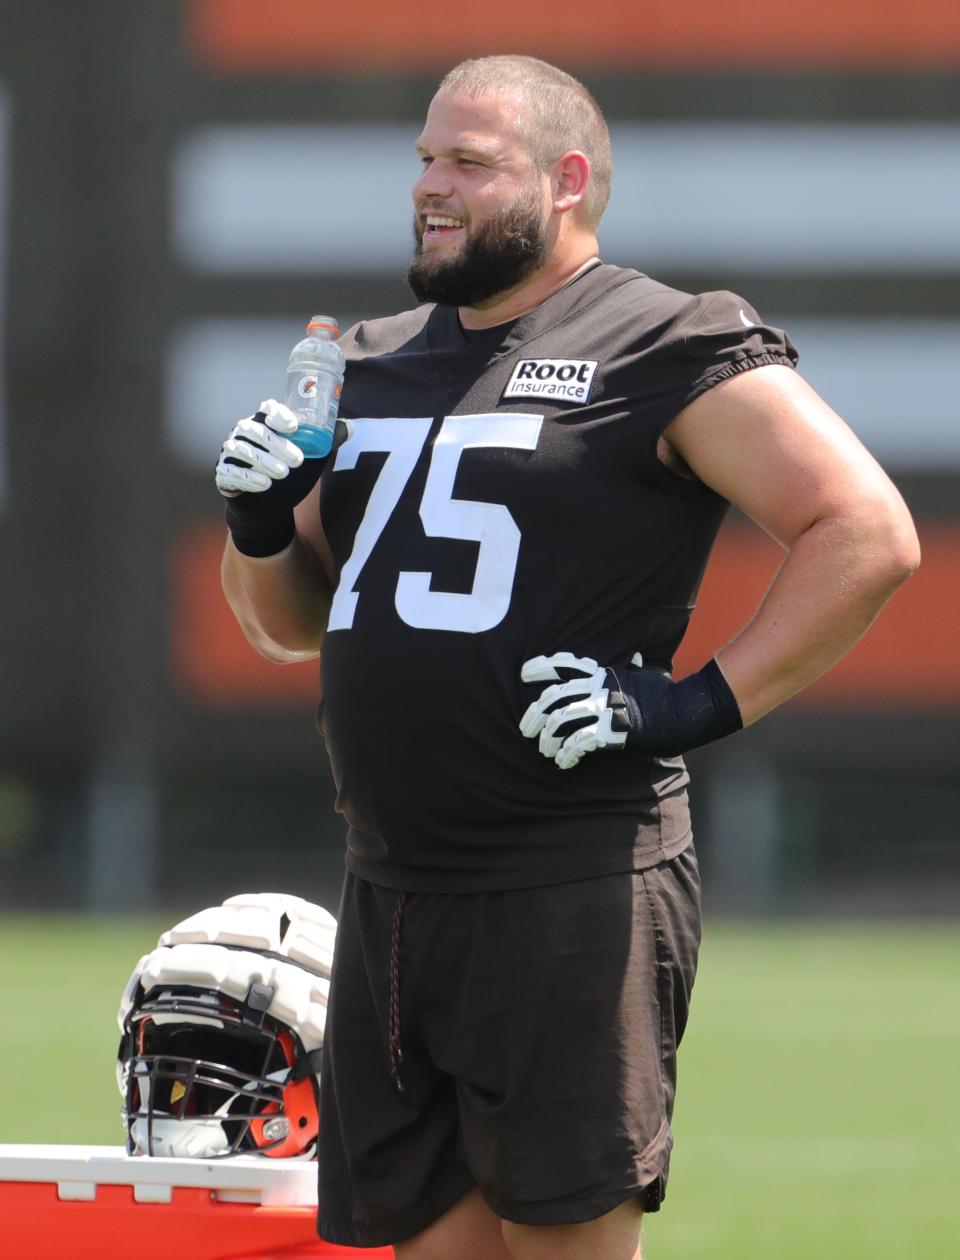 Cleveland Browns offensive lineman Joel Bitonio cools off during training camp on Thursday, July 28, 2022 in Berea.